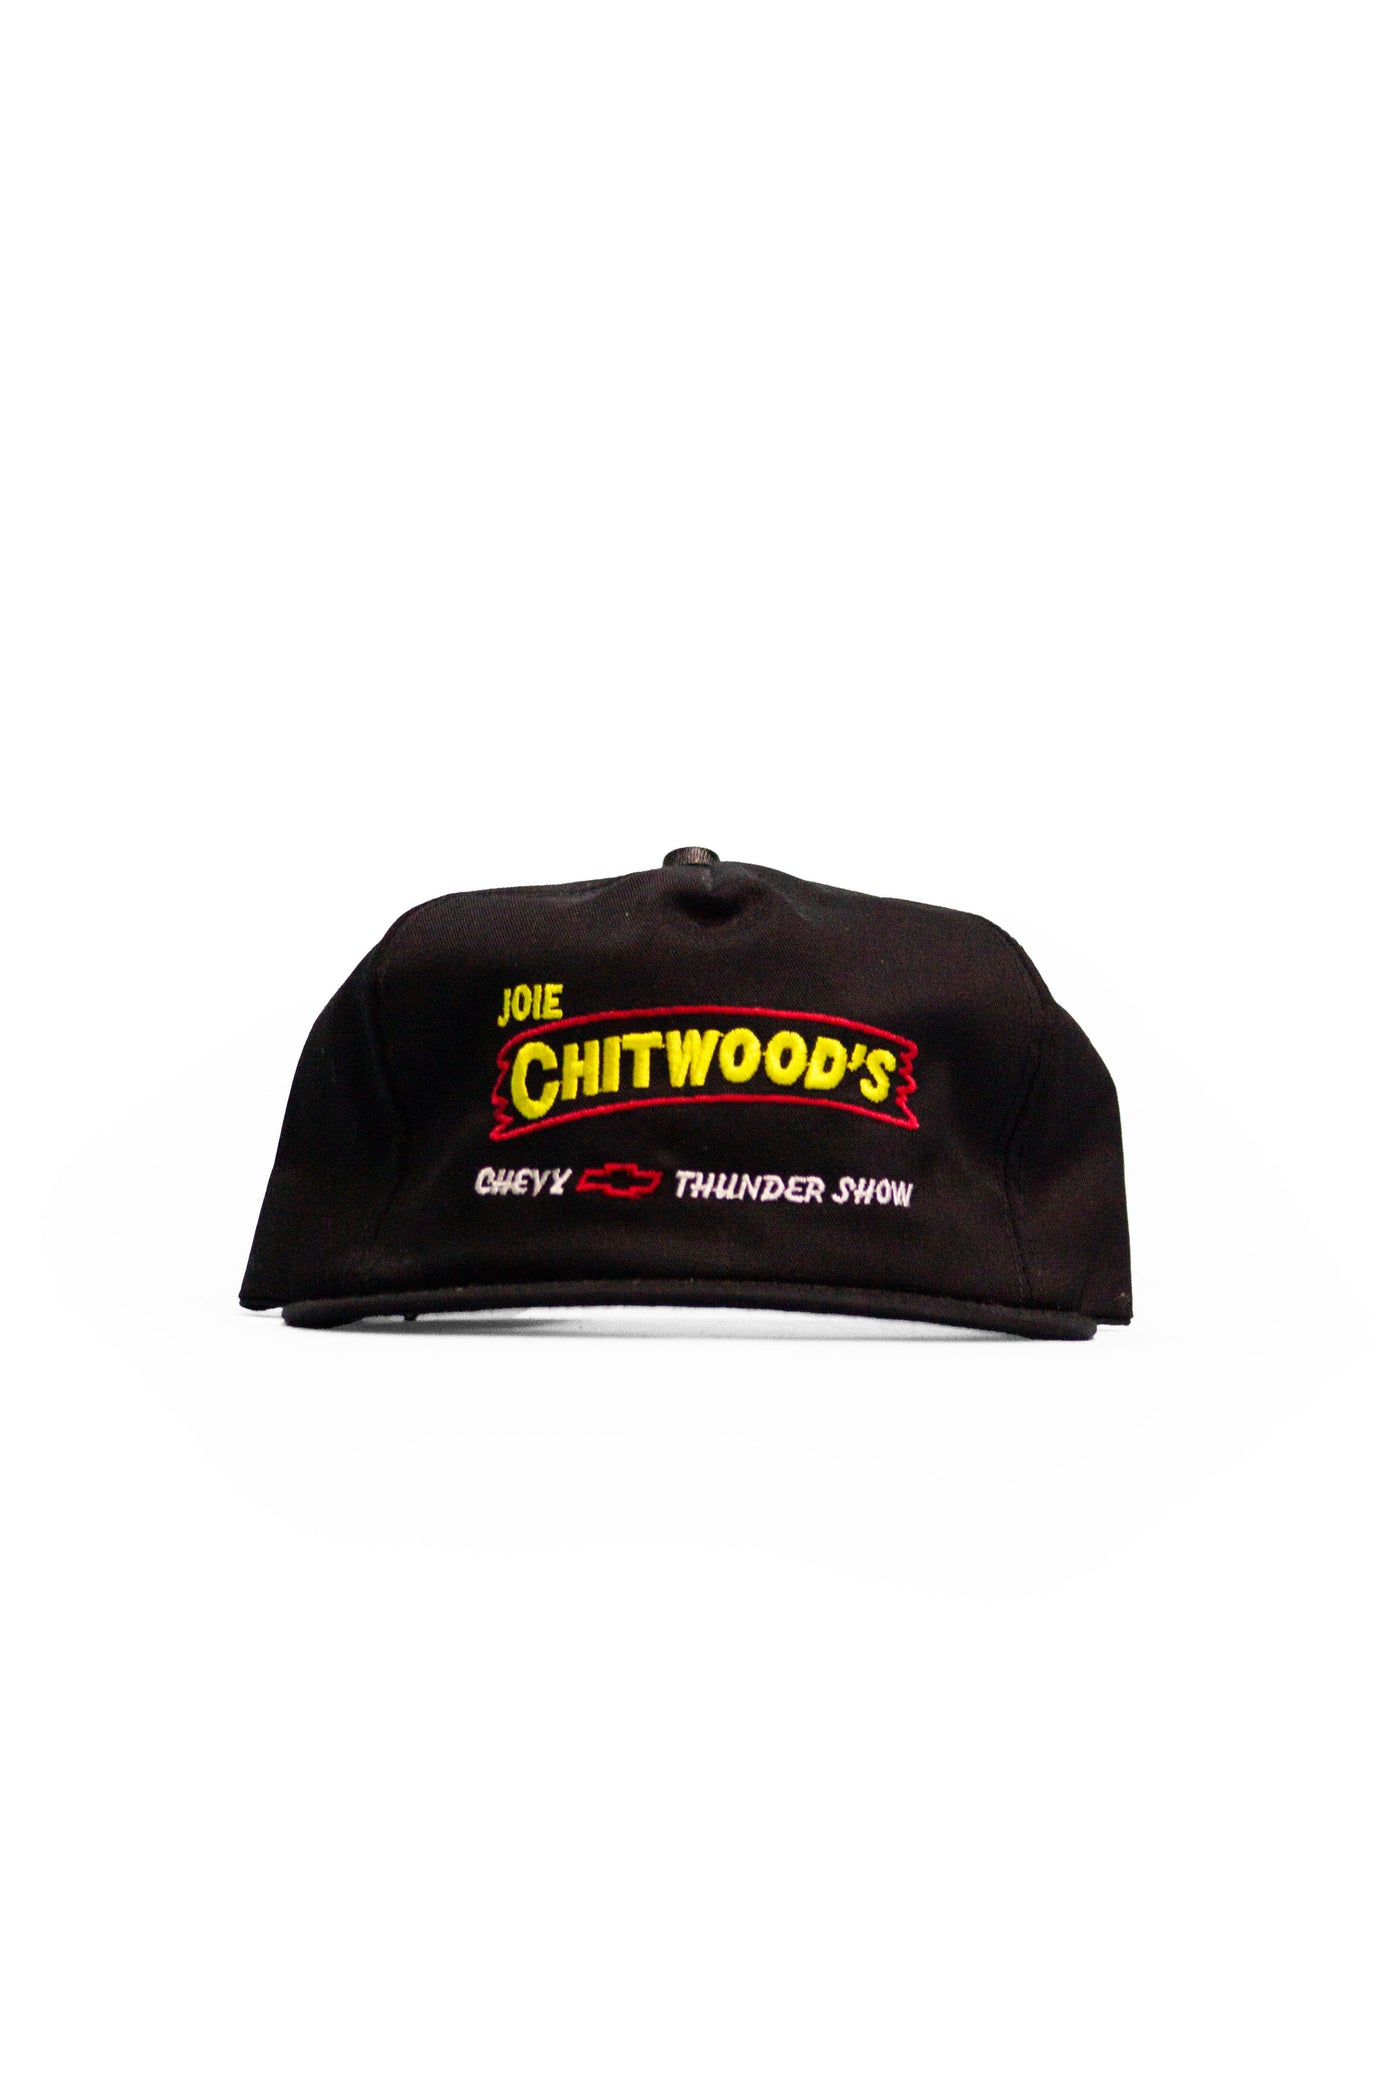 Vintage Joie Chitwoods Chevy Snapback